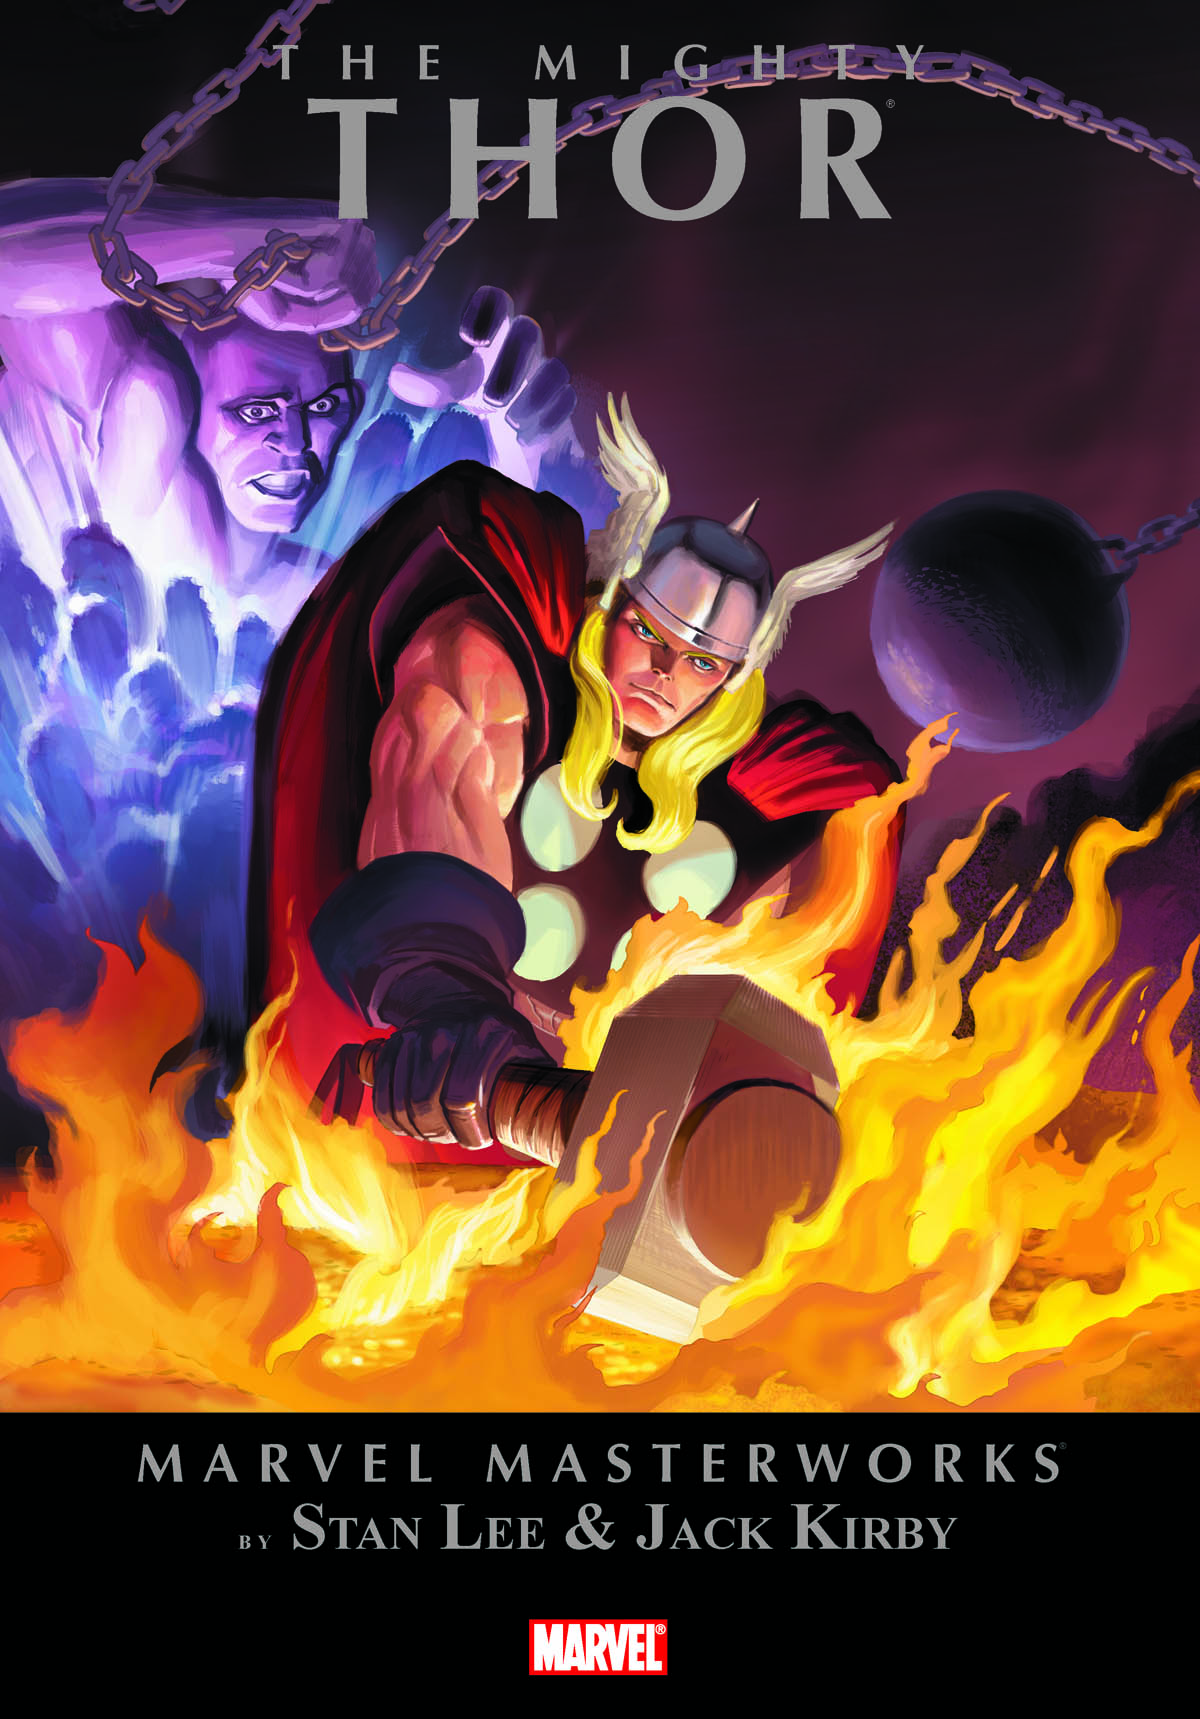 Marvel Masterworks: The Mighty Thor Vol. 3 (Trade Paperback)